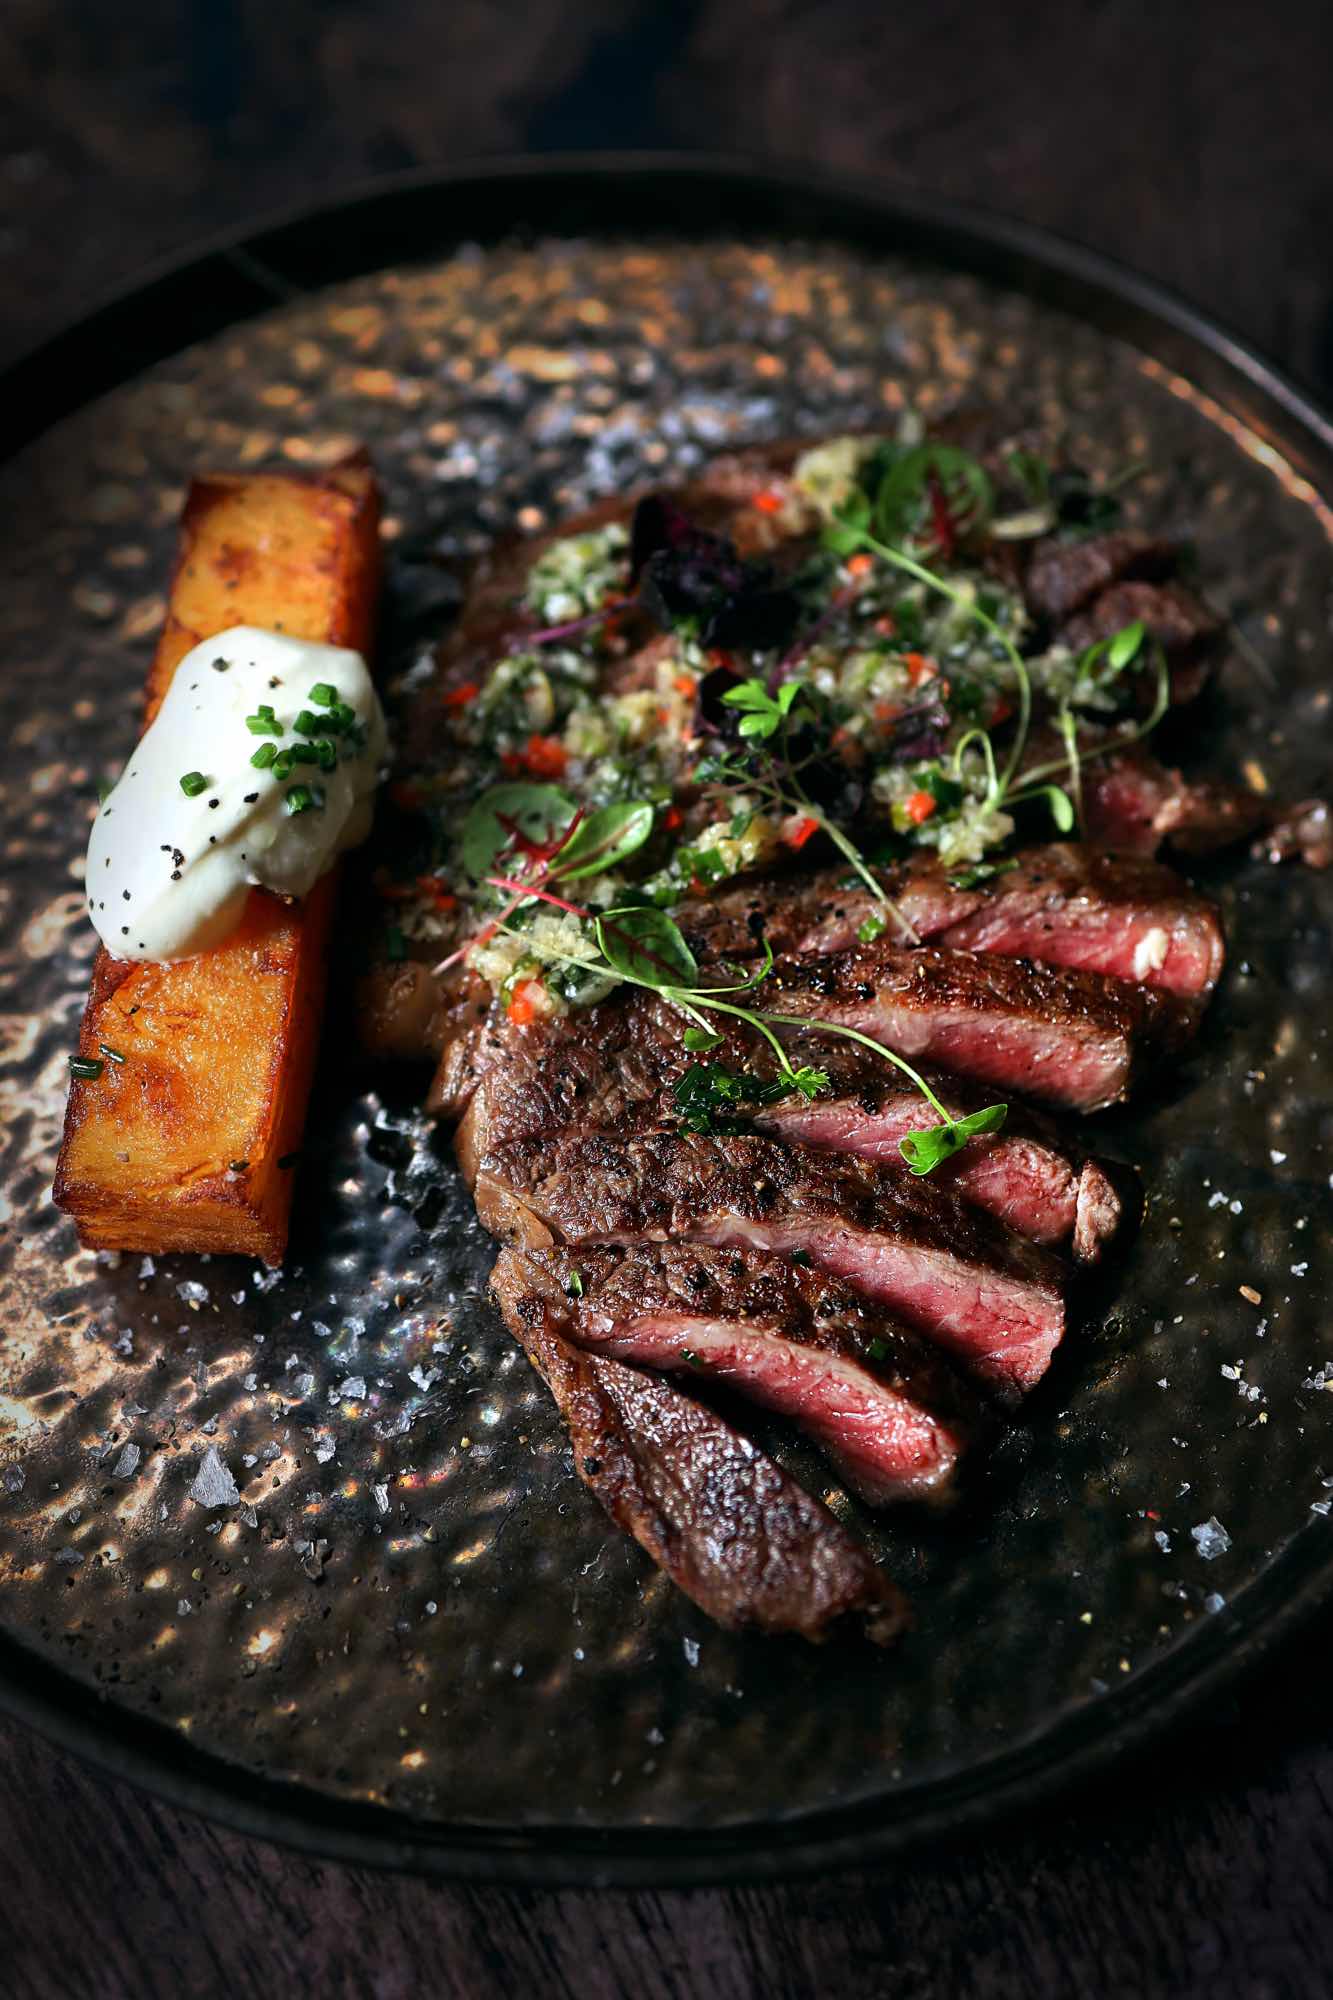 , 10 best steakhouses in Singapore for fine cuts of meat